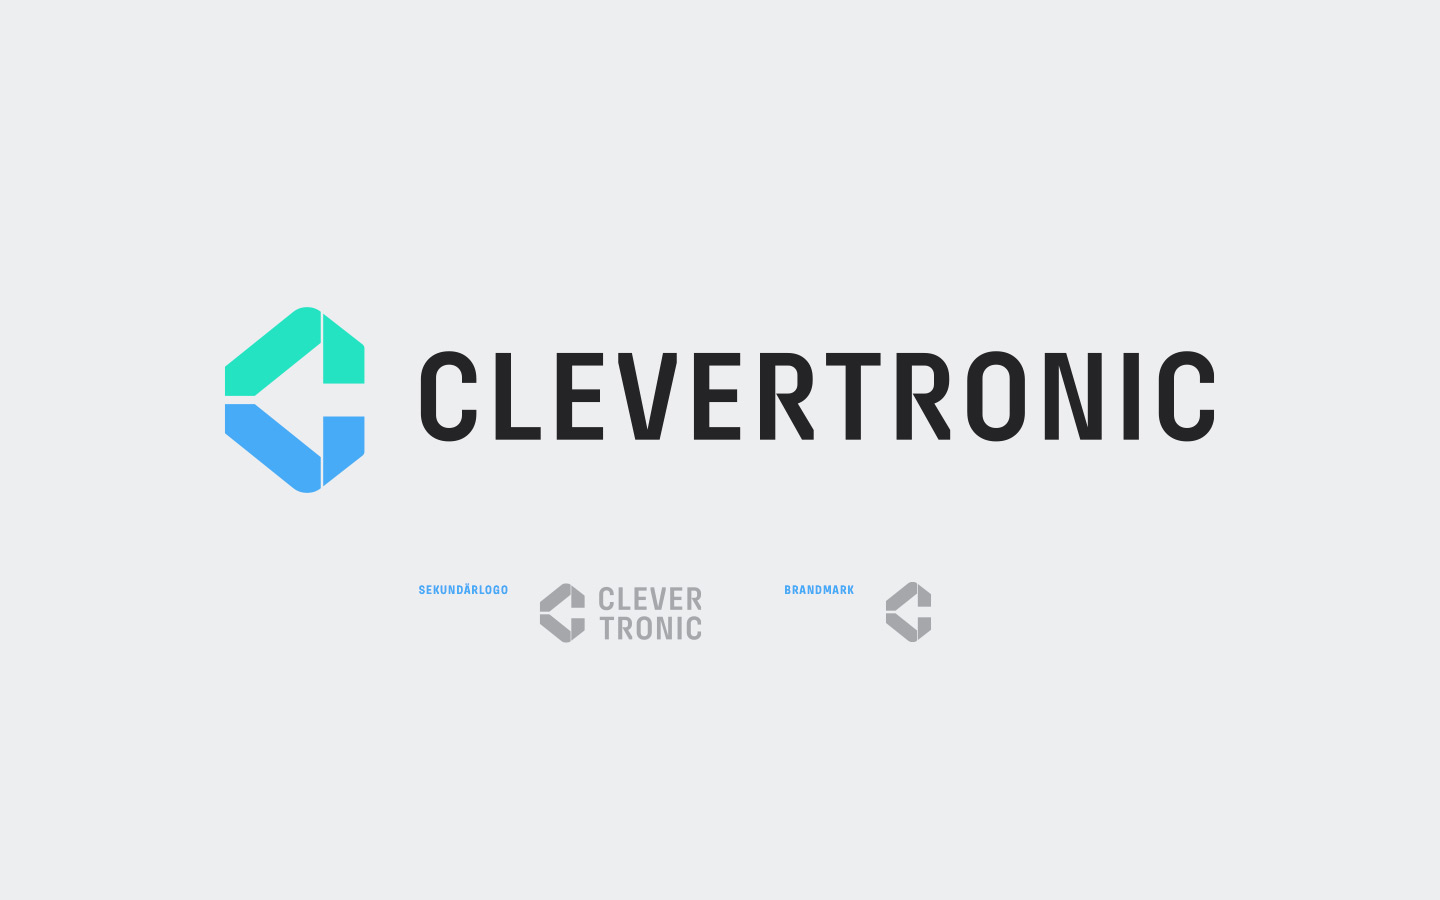 2021-flo-clevertronic-c